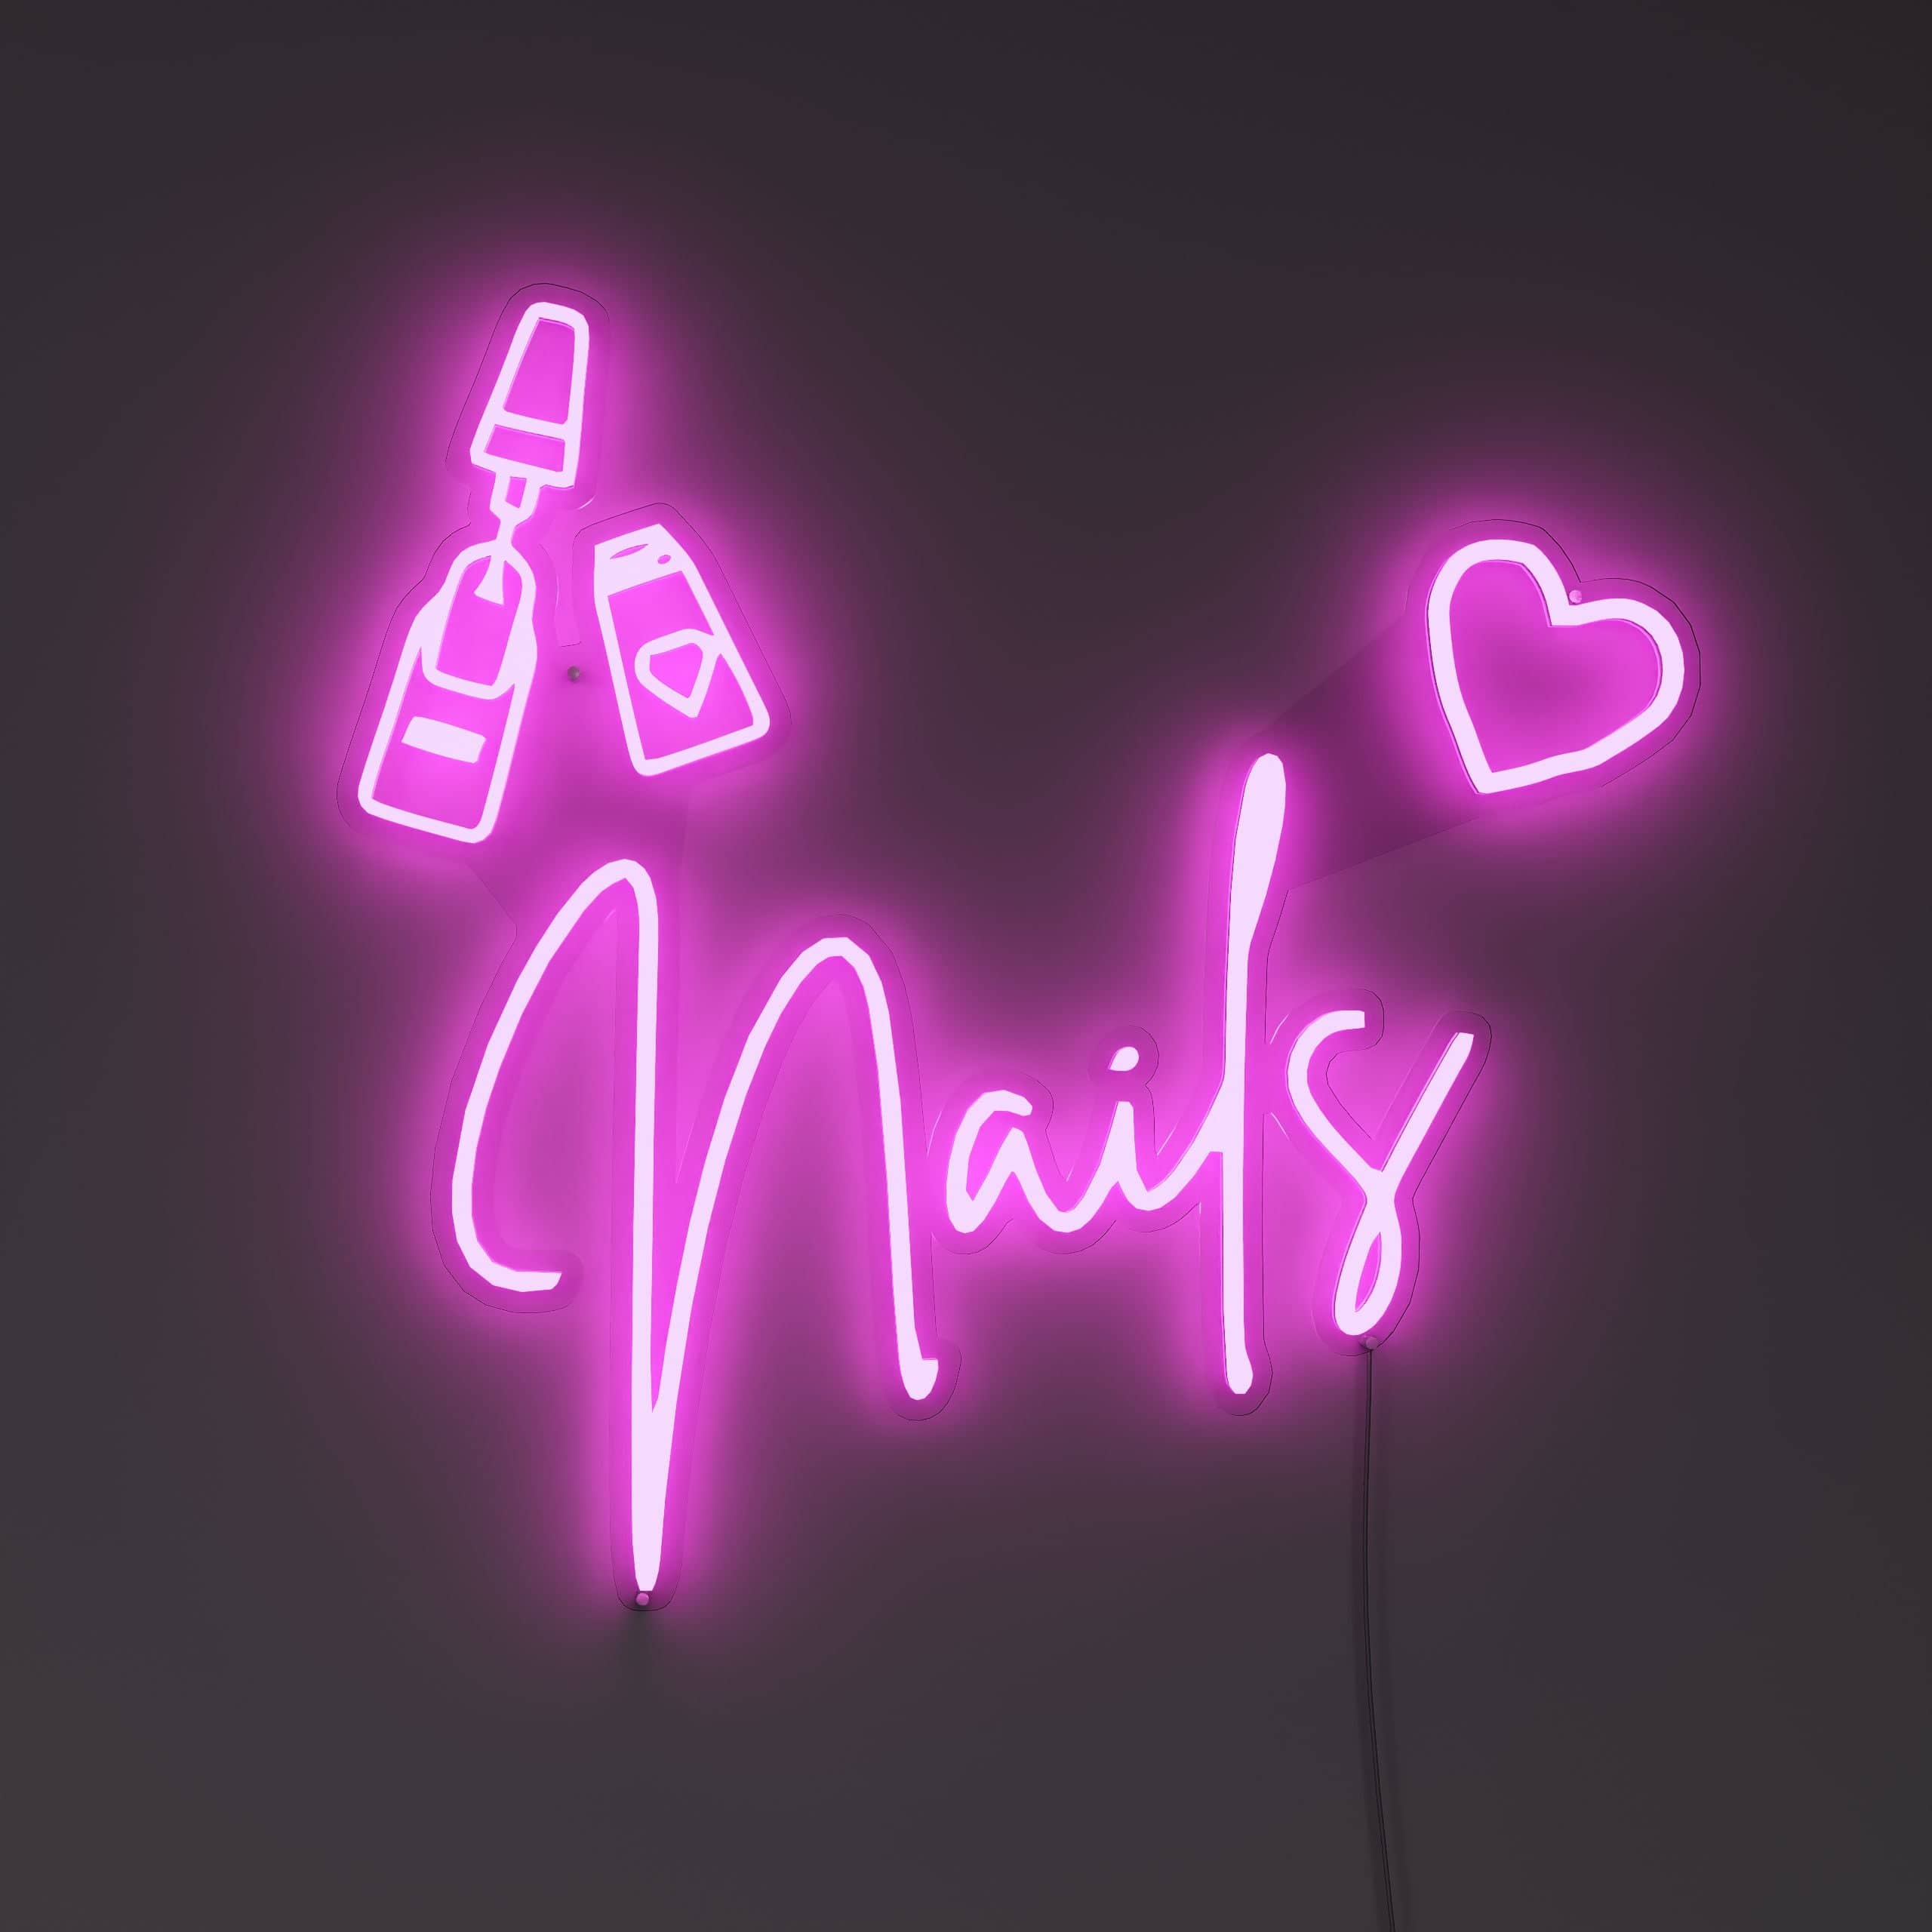 elevate-your-nail-game-with-style-and-grace!-neon-sign-lite